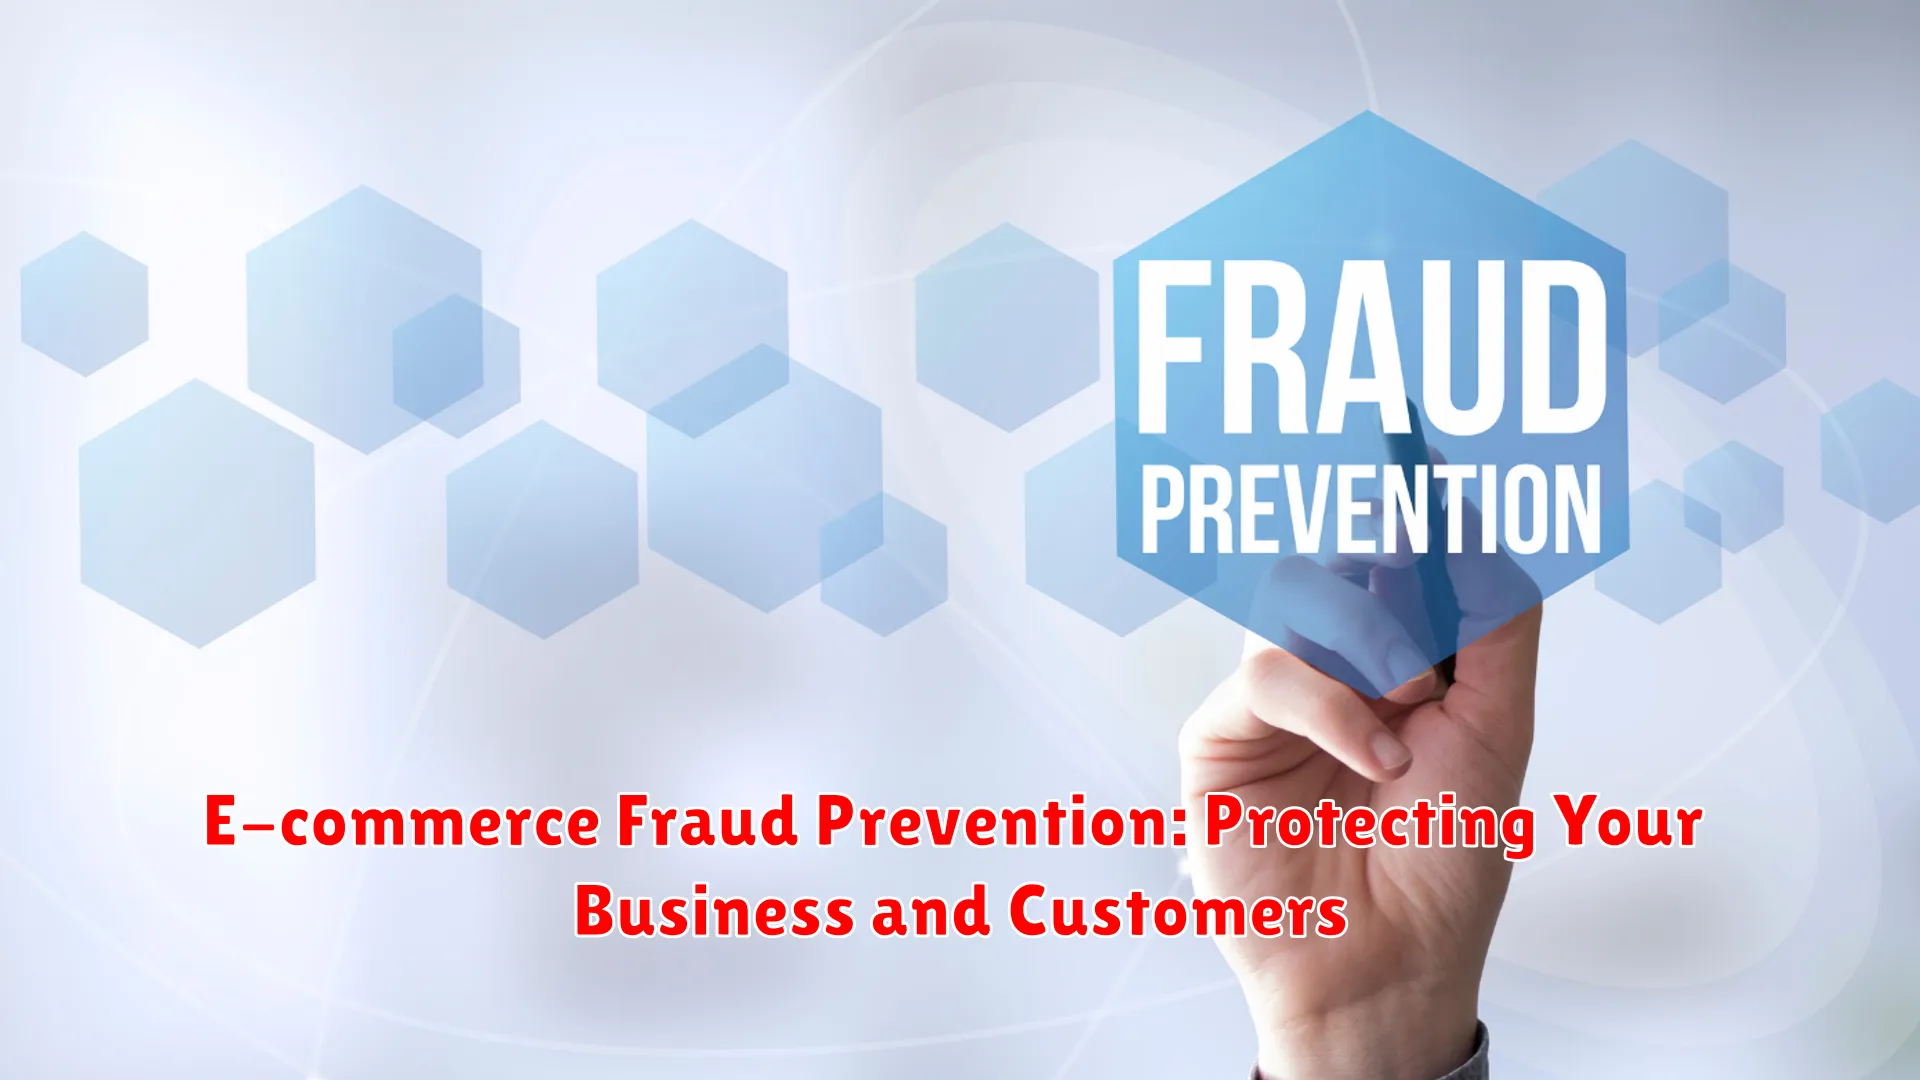 E-commerce Fraud Prevention: Protecting Your Business and Customers